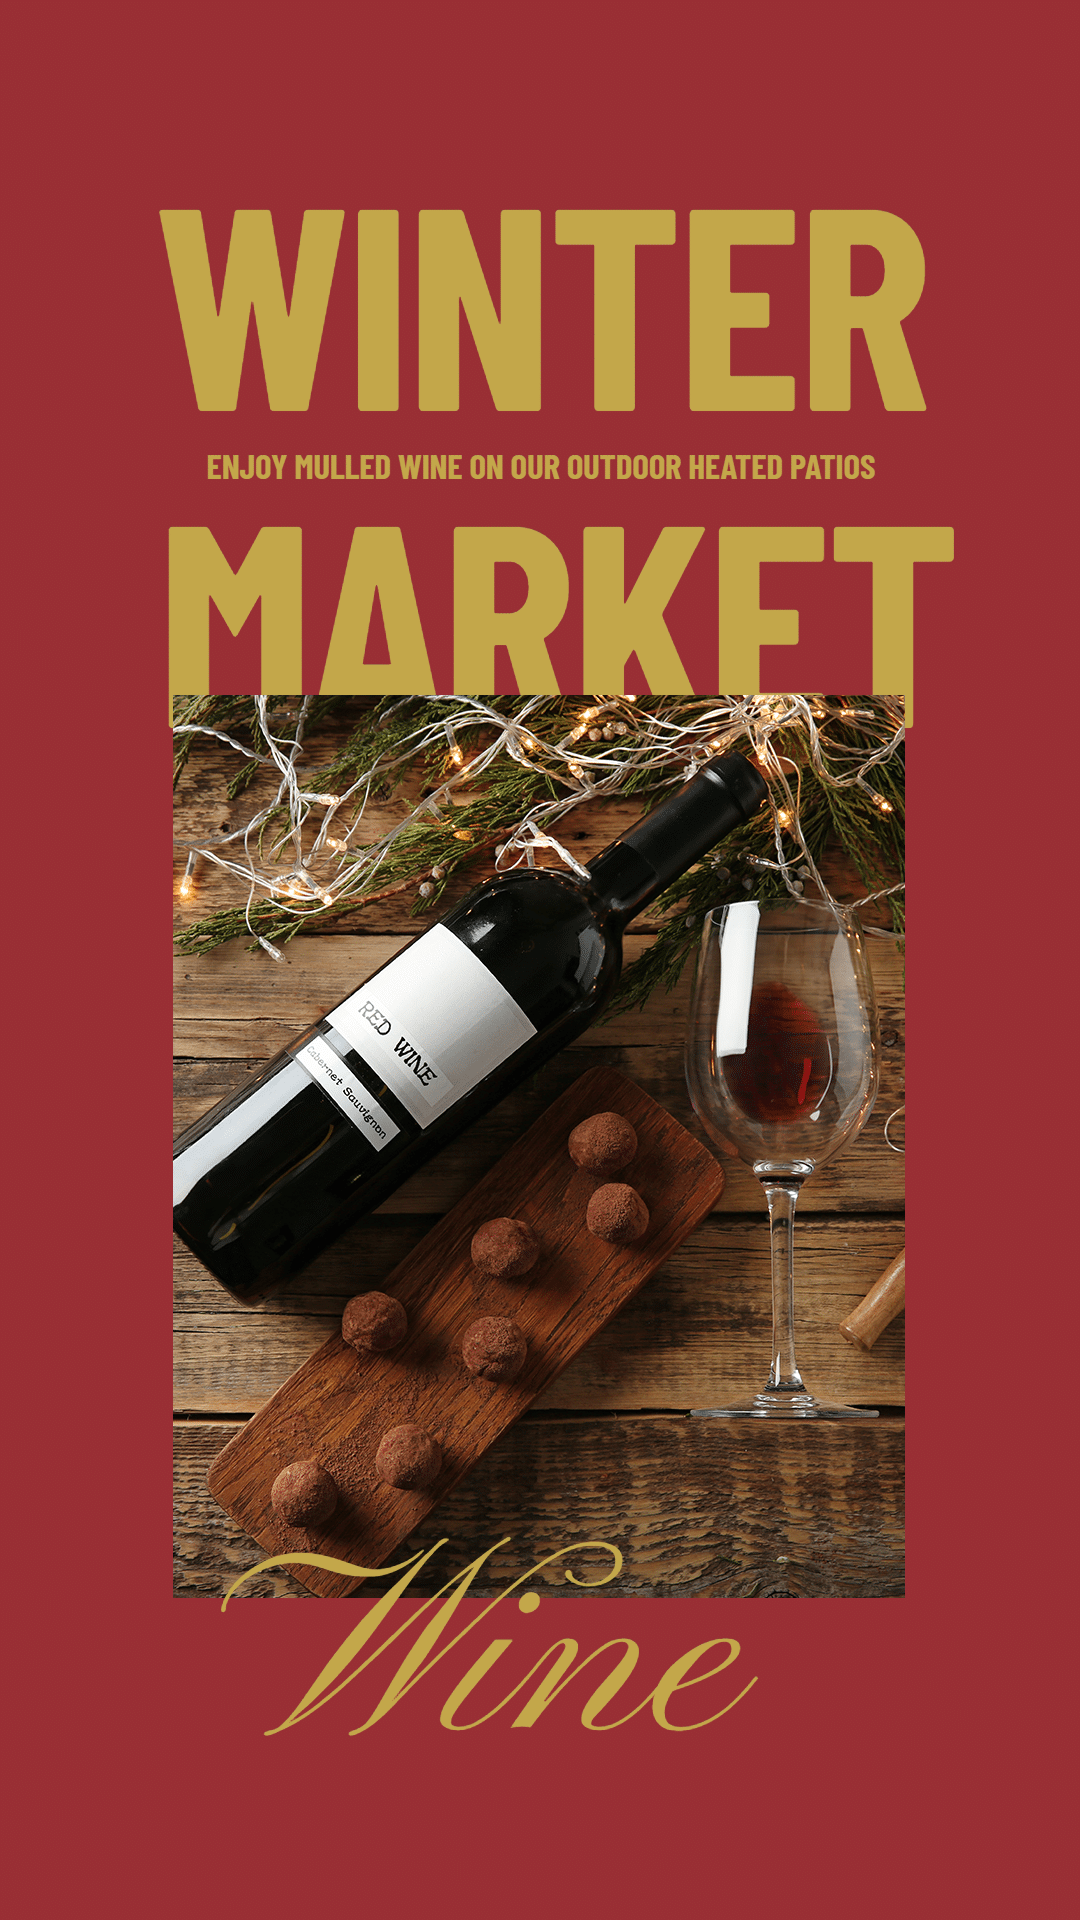 Winter Market Wine Display Photo Poster Ecommerce Story